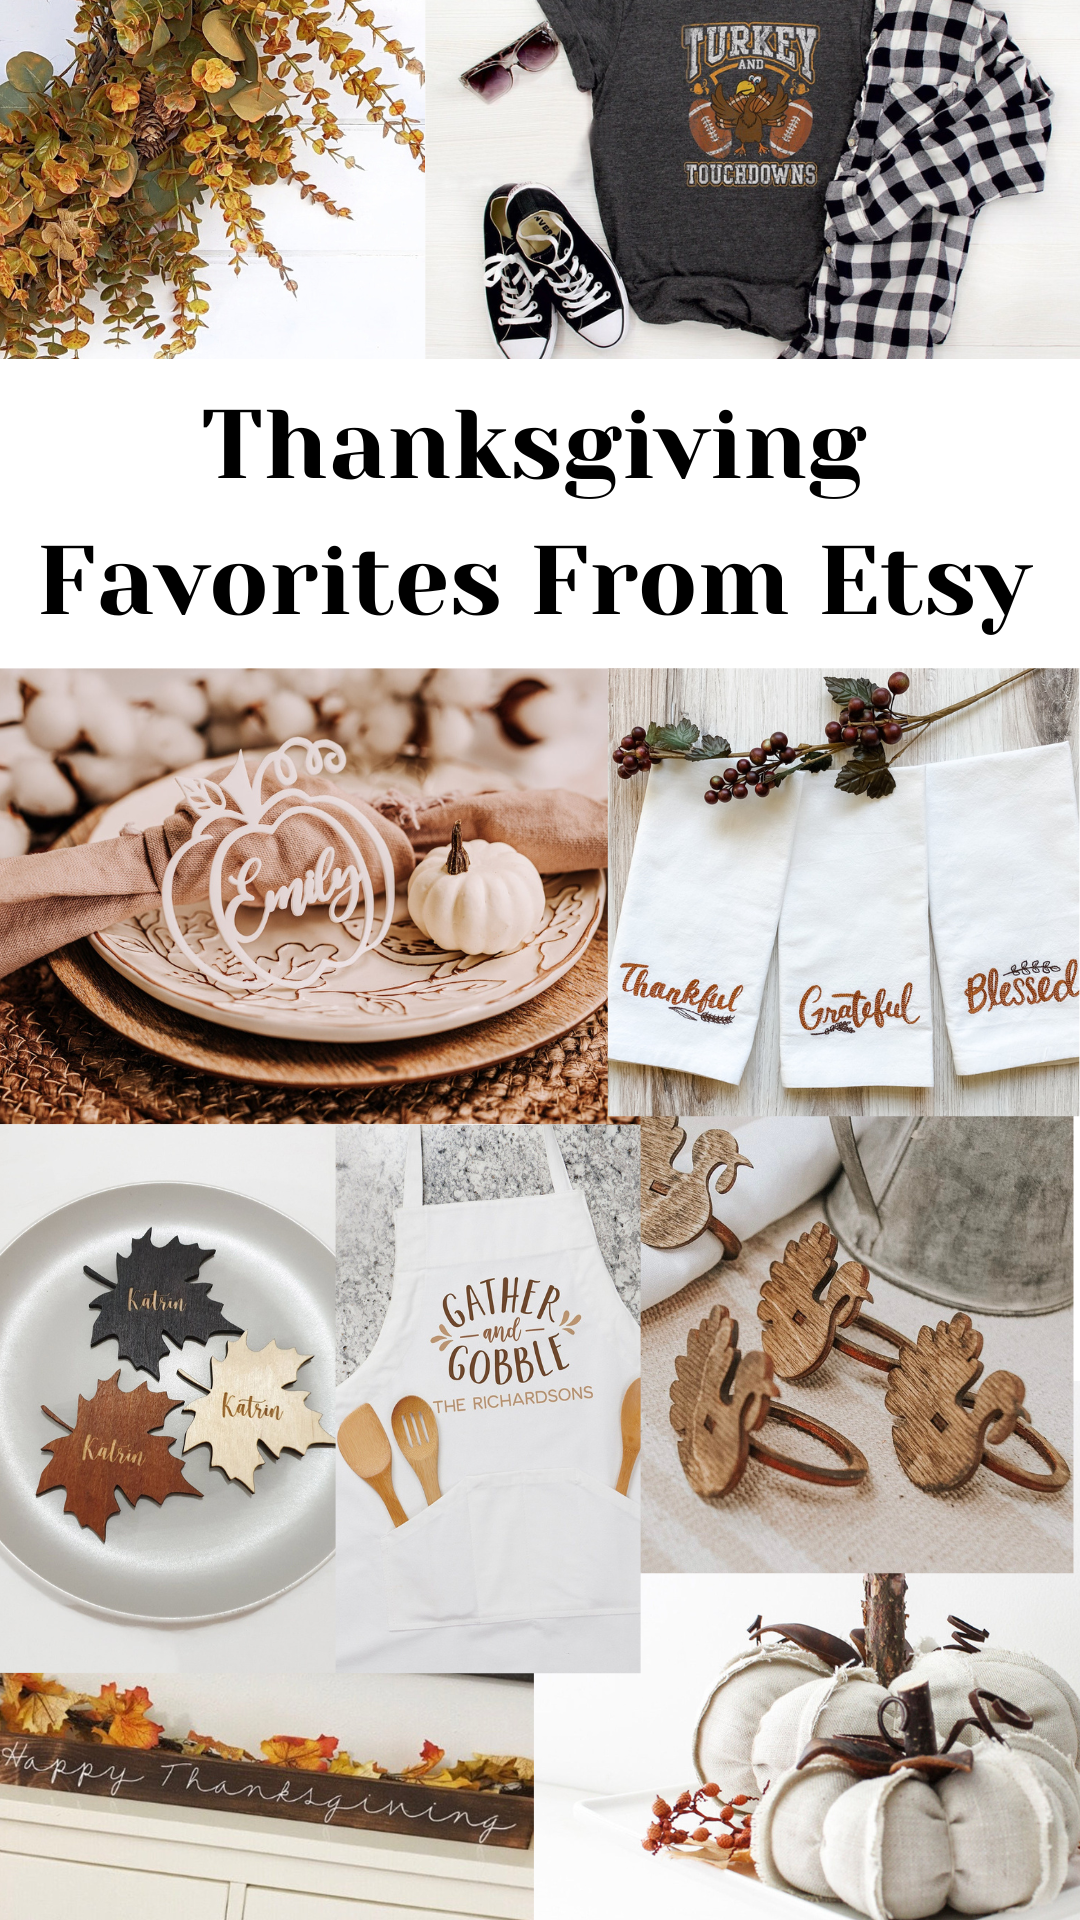 Thanksgiving Favorites from Etsy